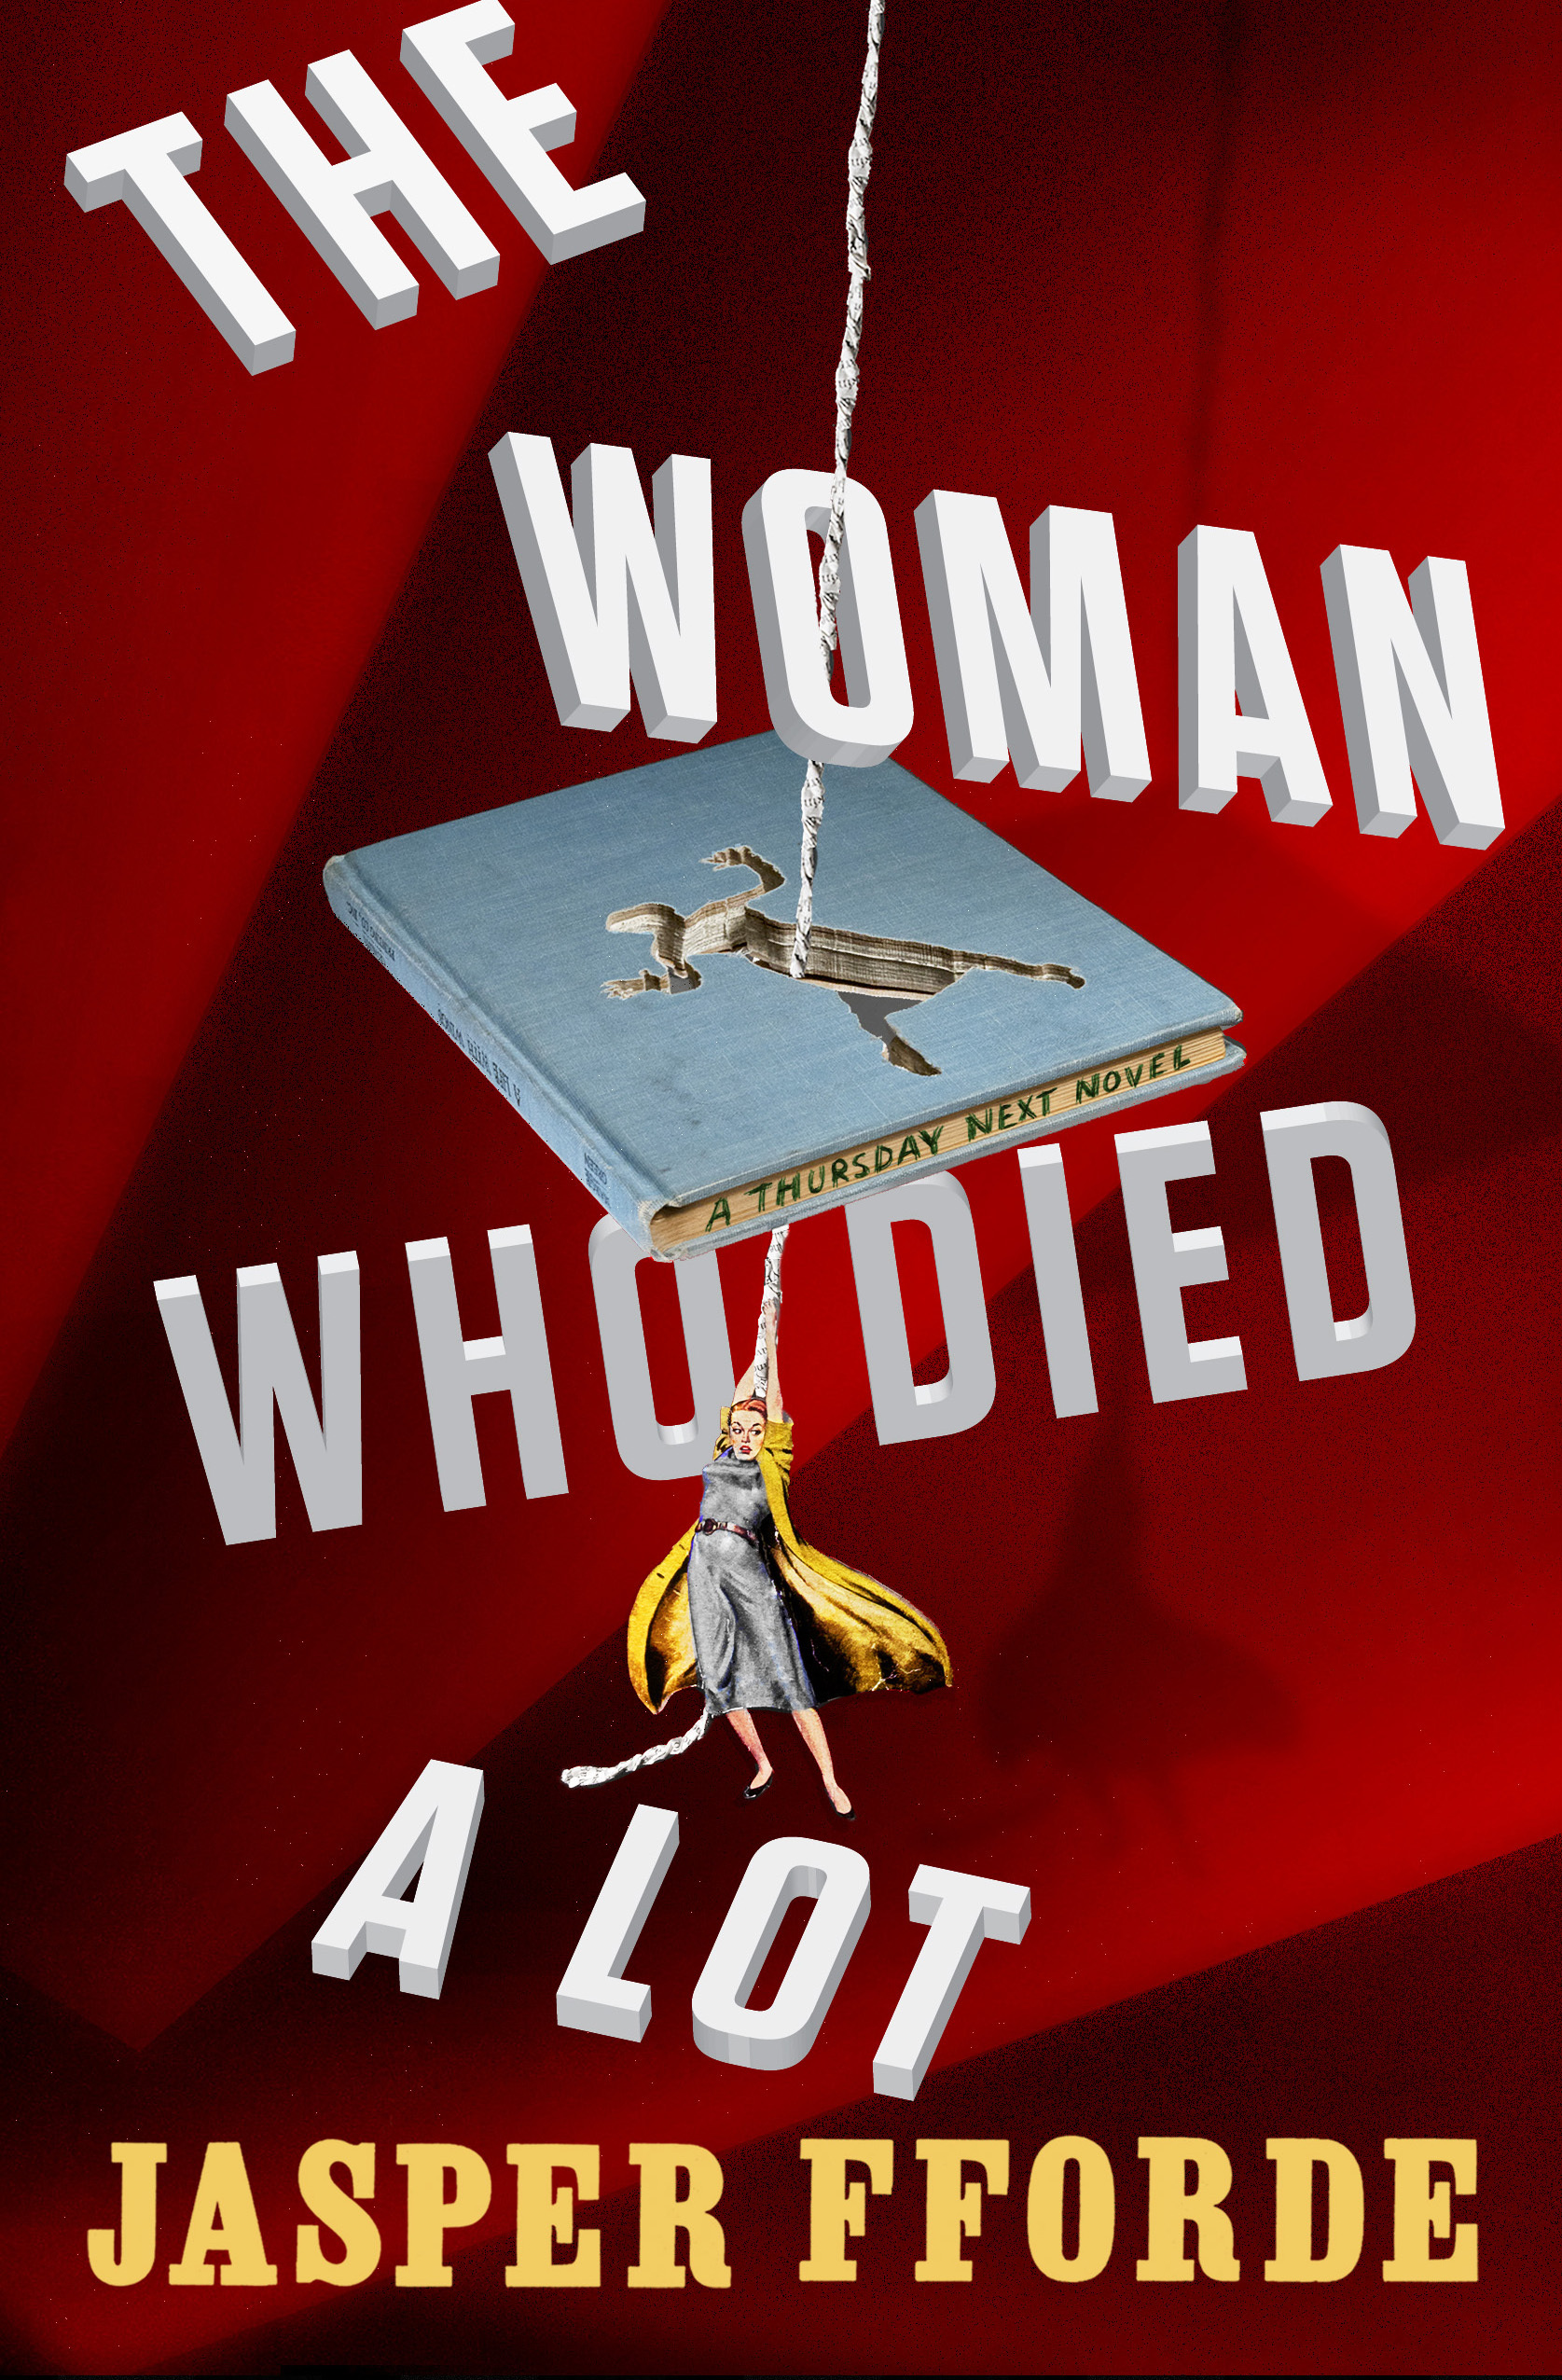 Jasper Fforde: The Woman Who Died a Lot (Hardcover, 2012, Viking)